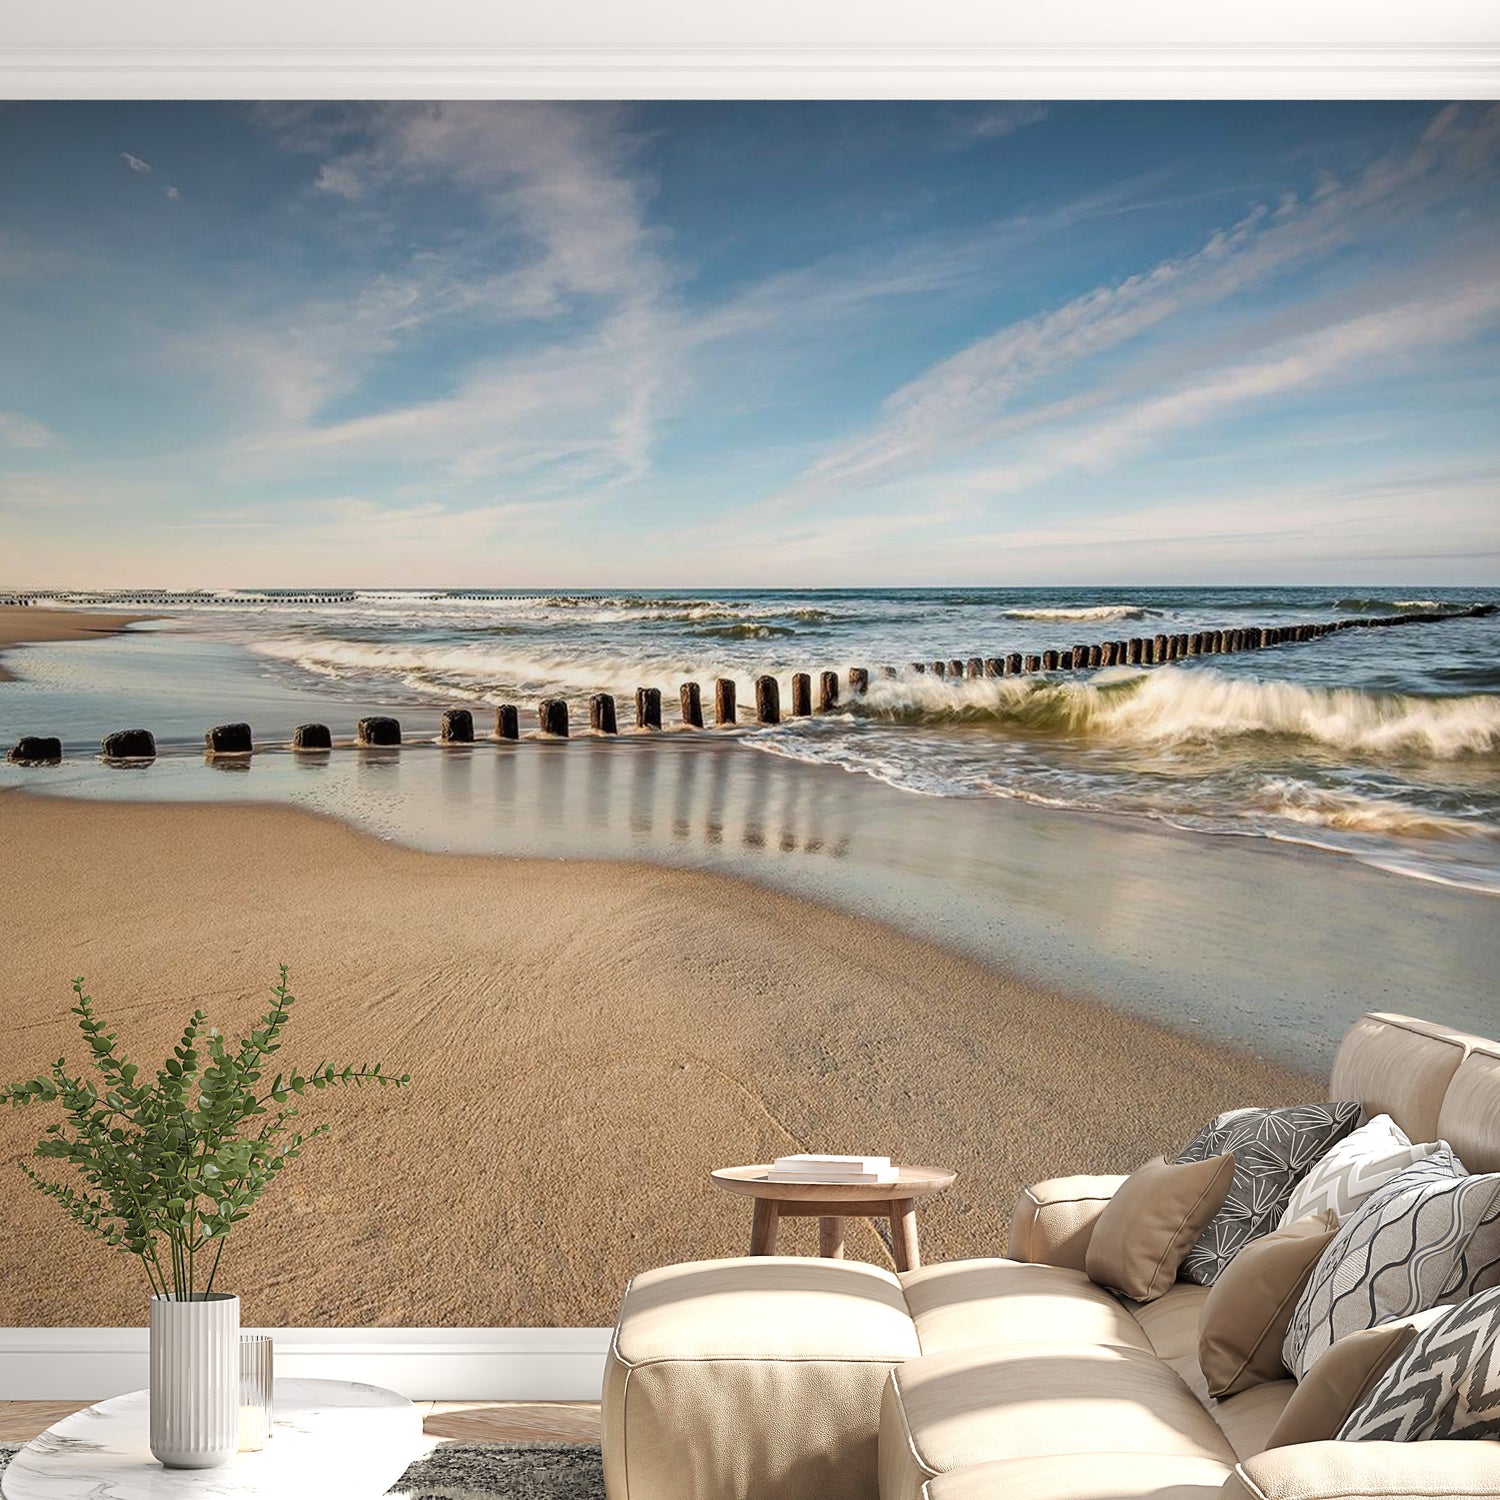 Peel & Stick Beach Wall Mural - Sea Breeze - Removable Wall Decals